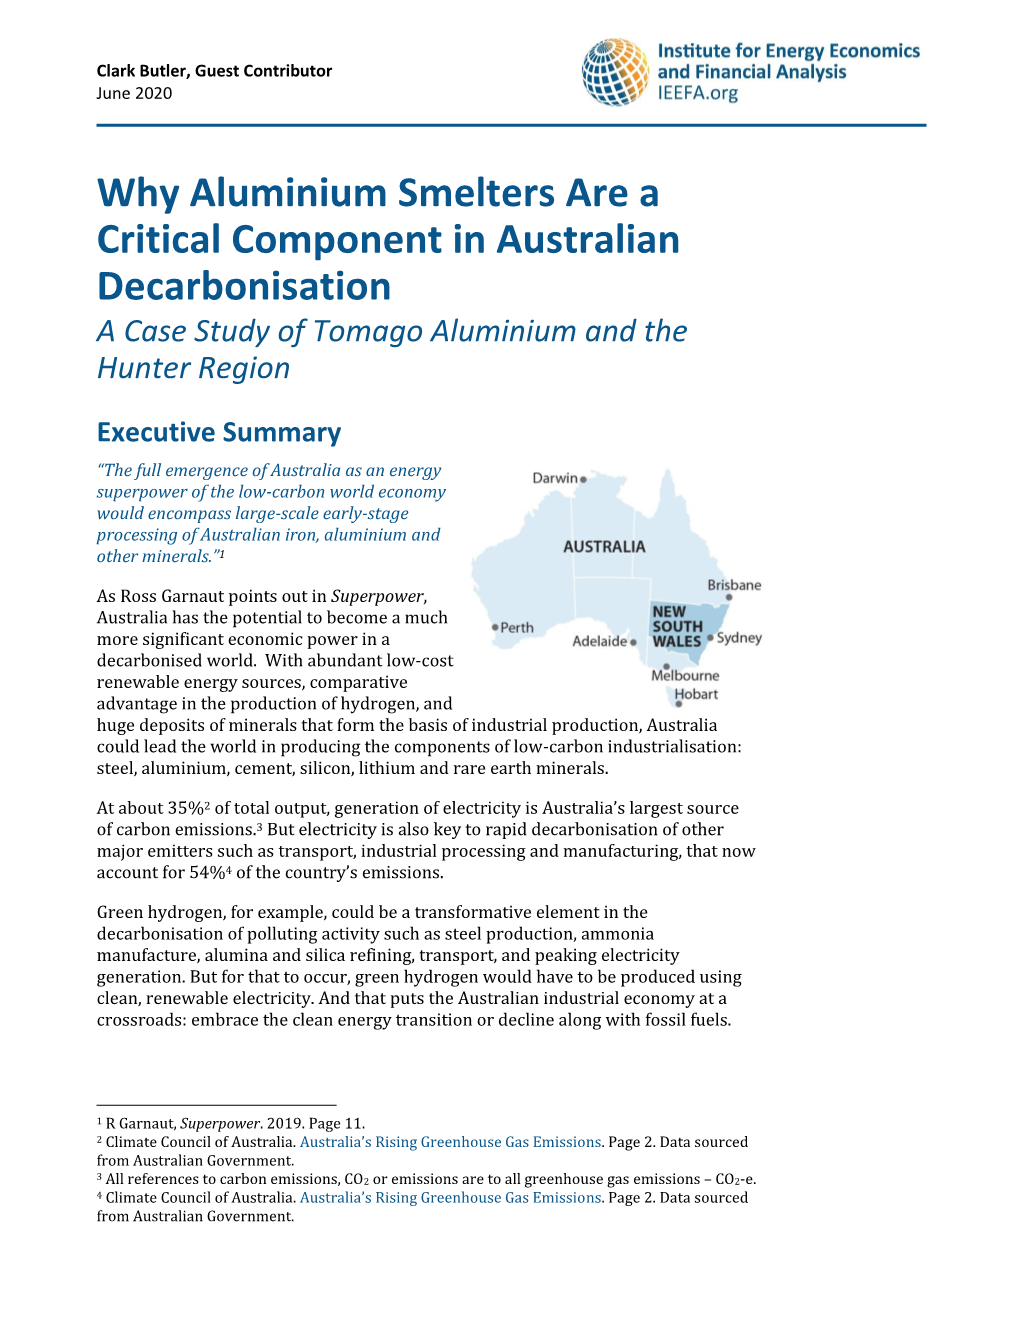 Why Aluminium Smelters Are a Critical Component in Australian Decarbonisation a Case Study of Tomago Aluminium and the Hunter Region